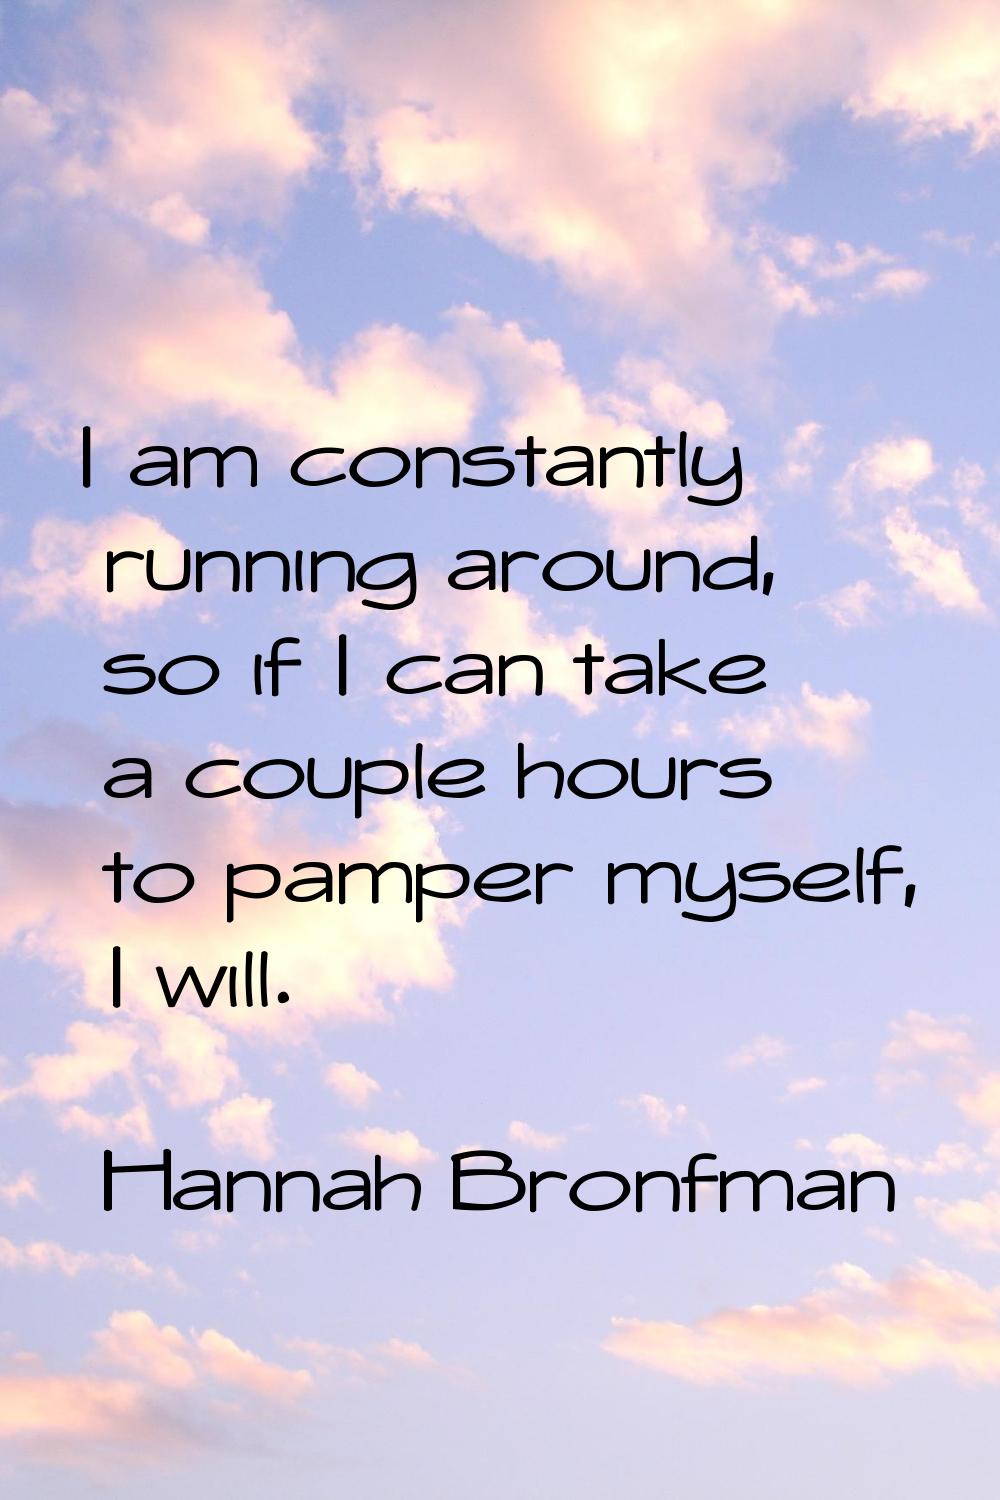 I am constantly running around, so if I can take a couple hours to pamper myself, I will.